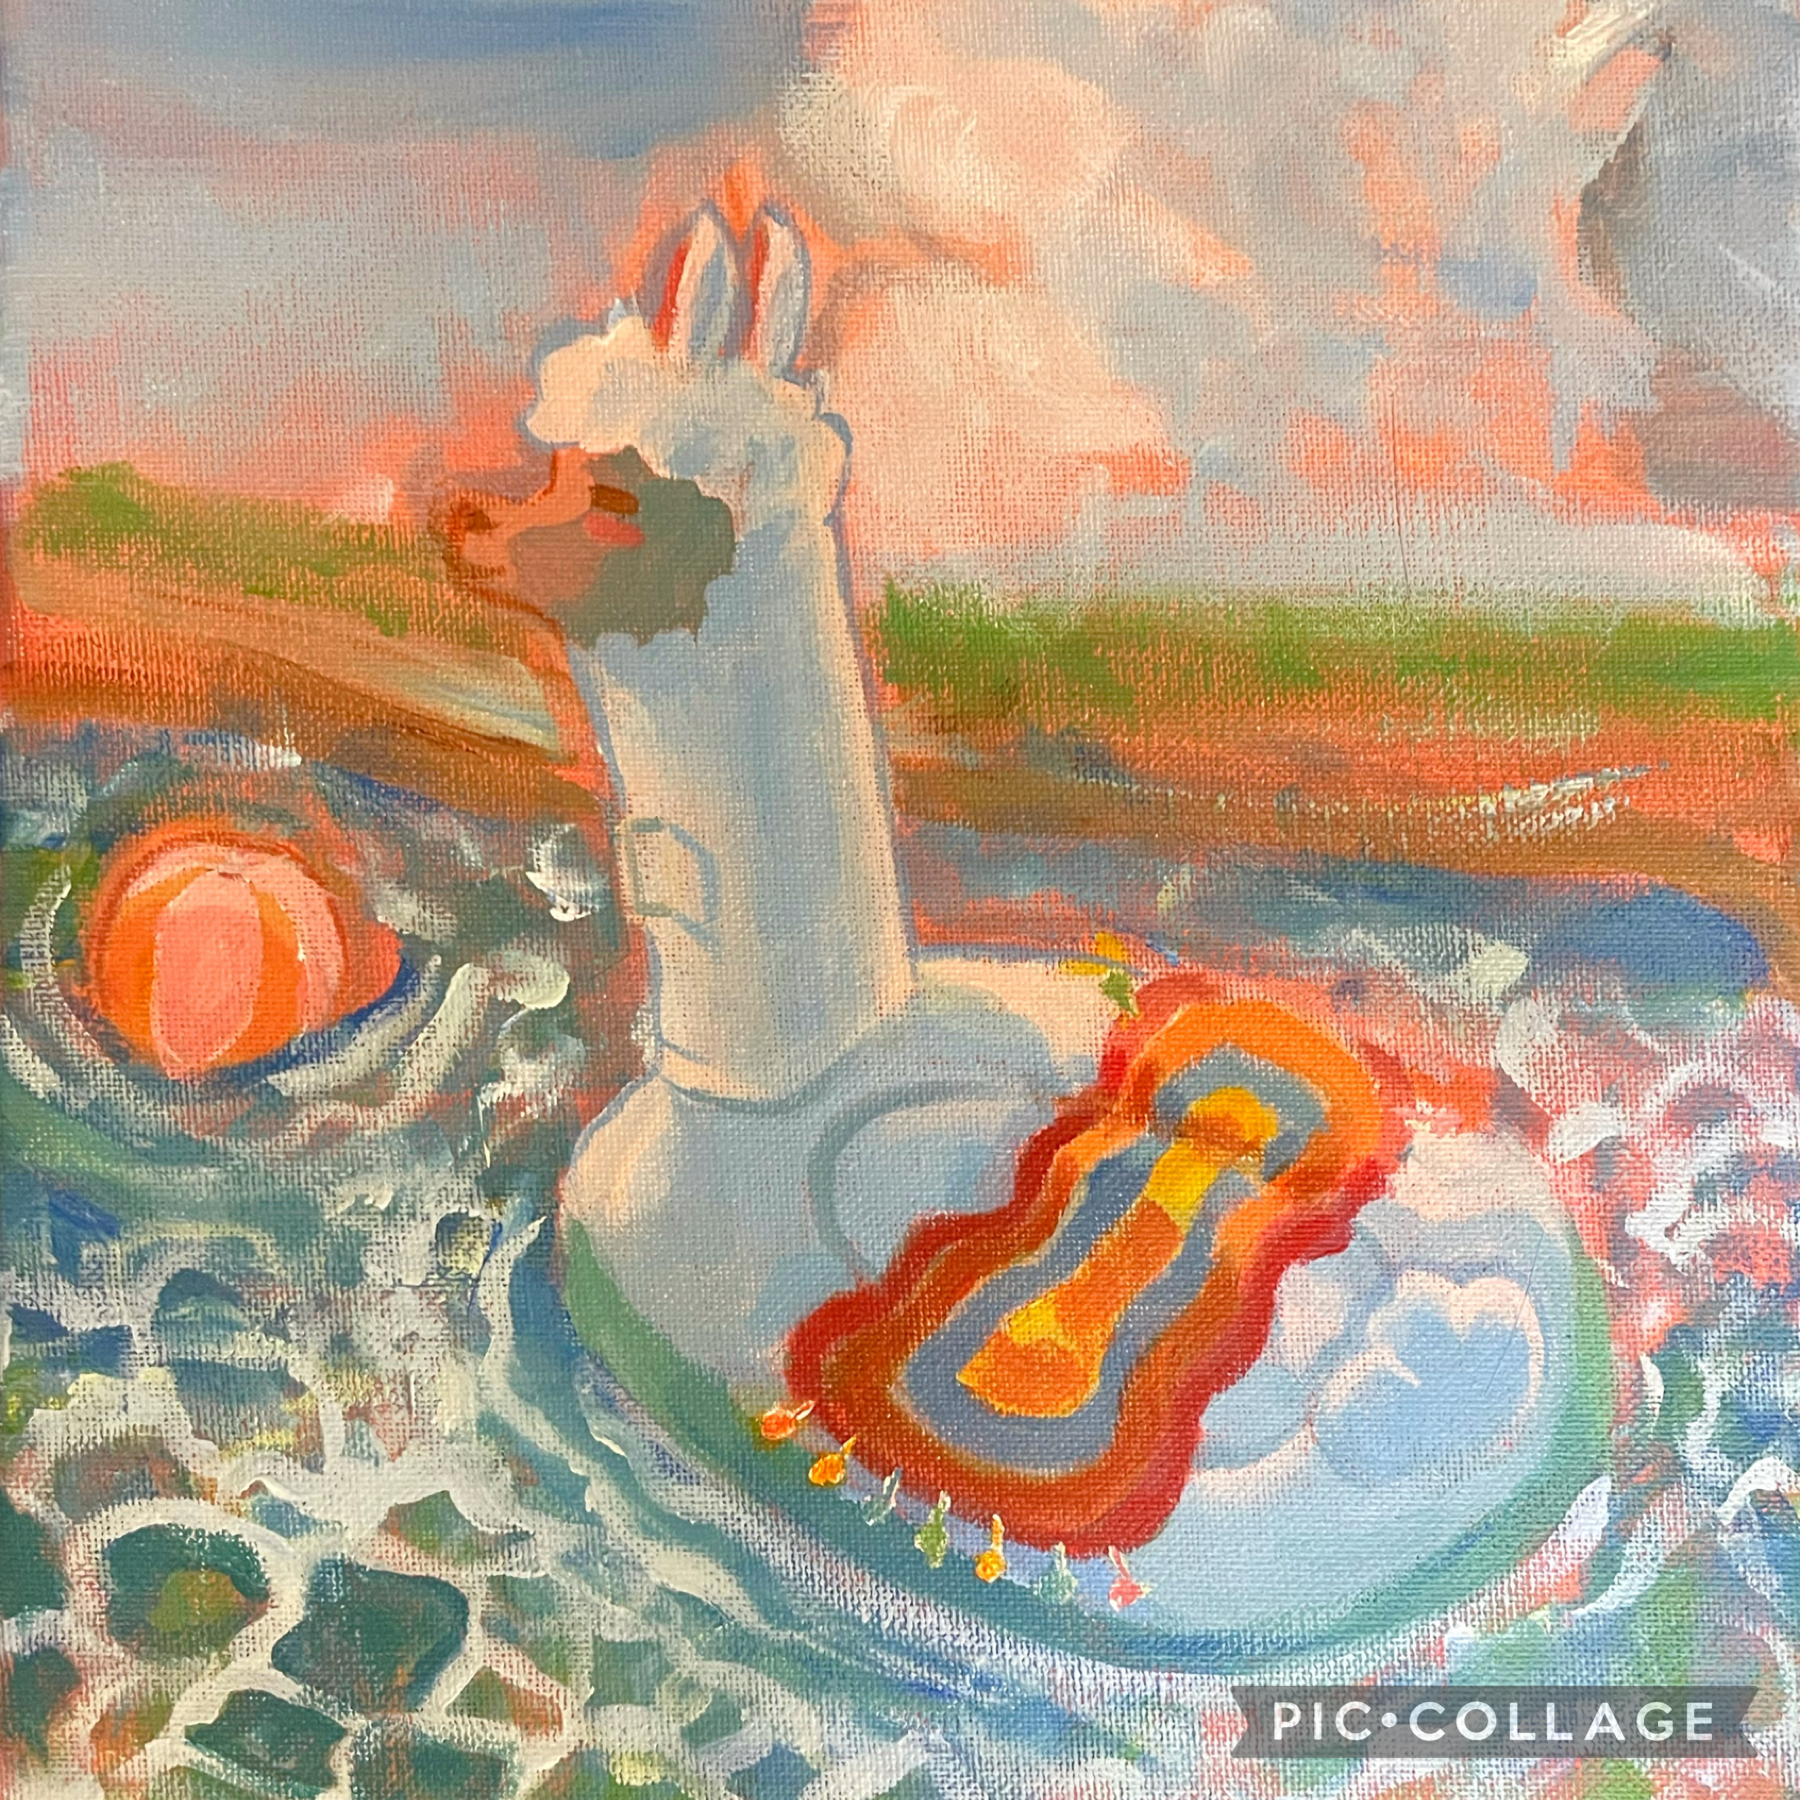 Nothing to post so take this unfinished painting of my inflatable llama

Also arguing with homophobic christians on Instagram is so funny bc they make me feel smart 

(Cont. in comments)